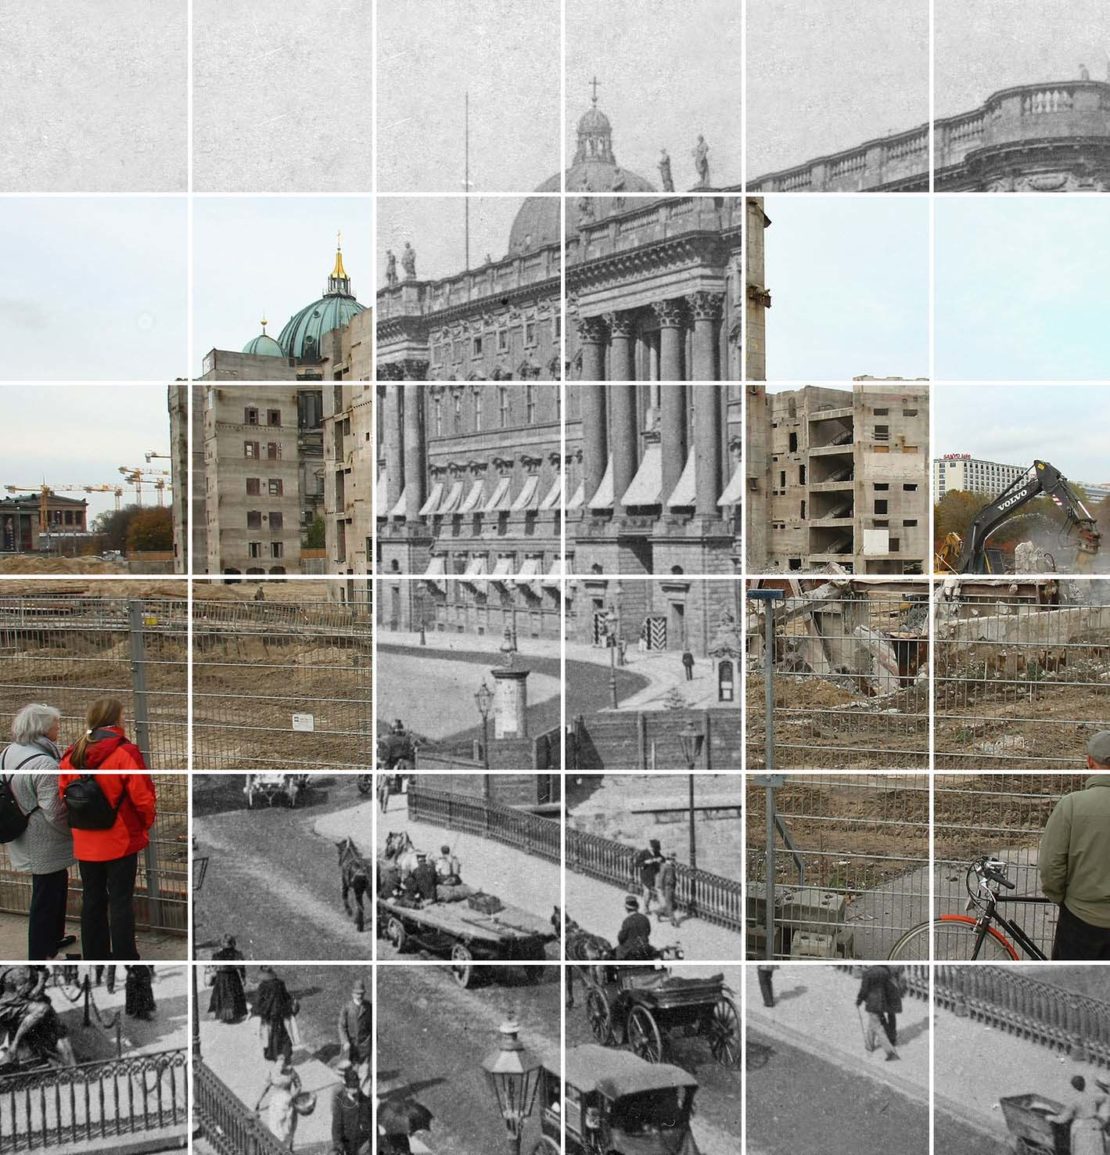 Photo montage of Berlin's 18th century City Palace in its original sombre grandeur, and the current building project recreating it on the same site 